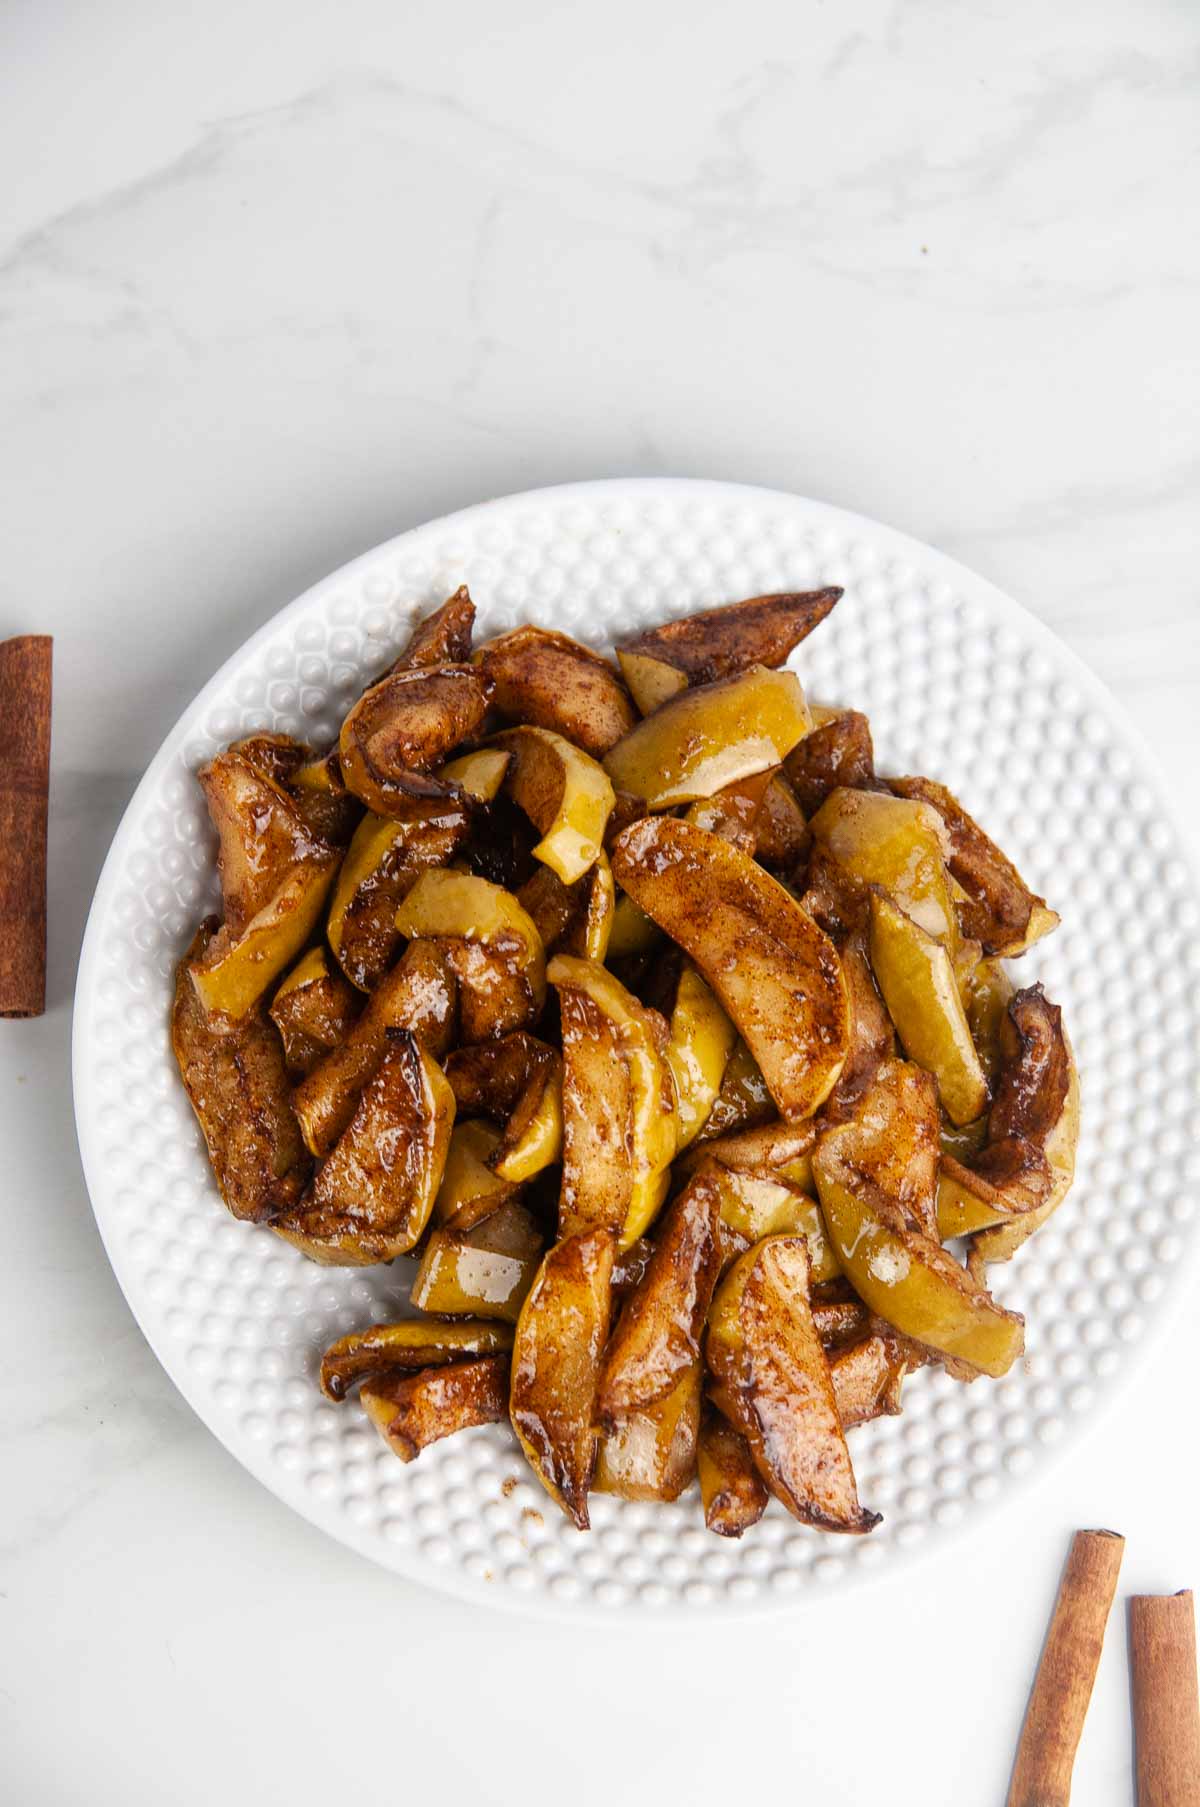 Air fryer apples are a lighter version of the side and dessert